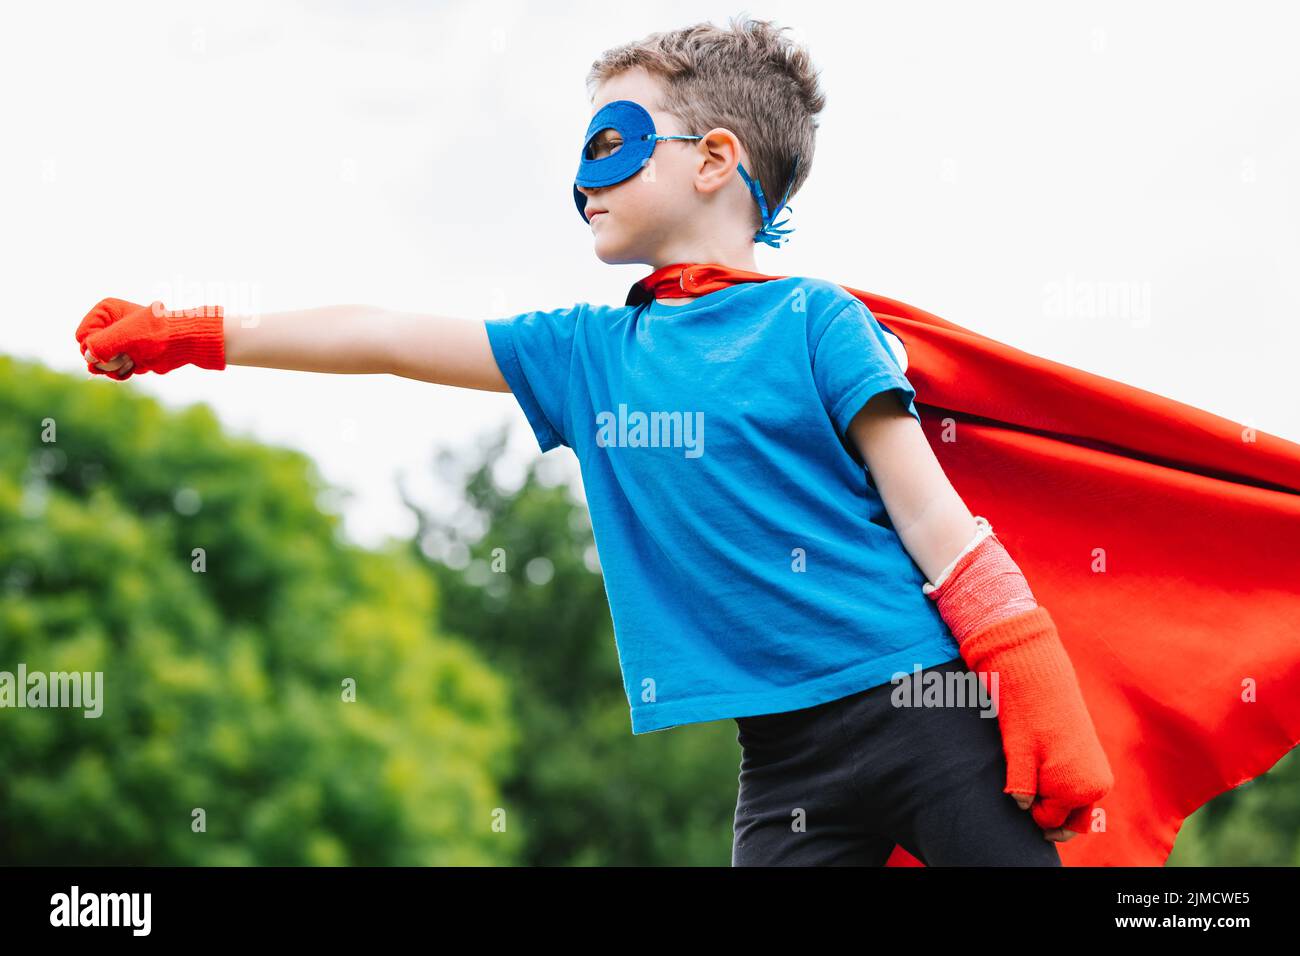 Side view of little superhero with cape and mask raising arm with clenched fist and screaming against green trees and cloudy sky on summer day in park Stock Photo